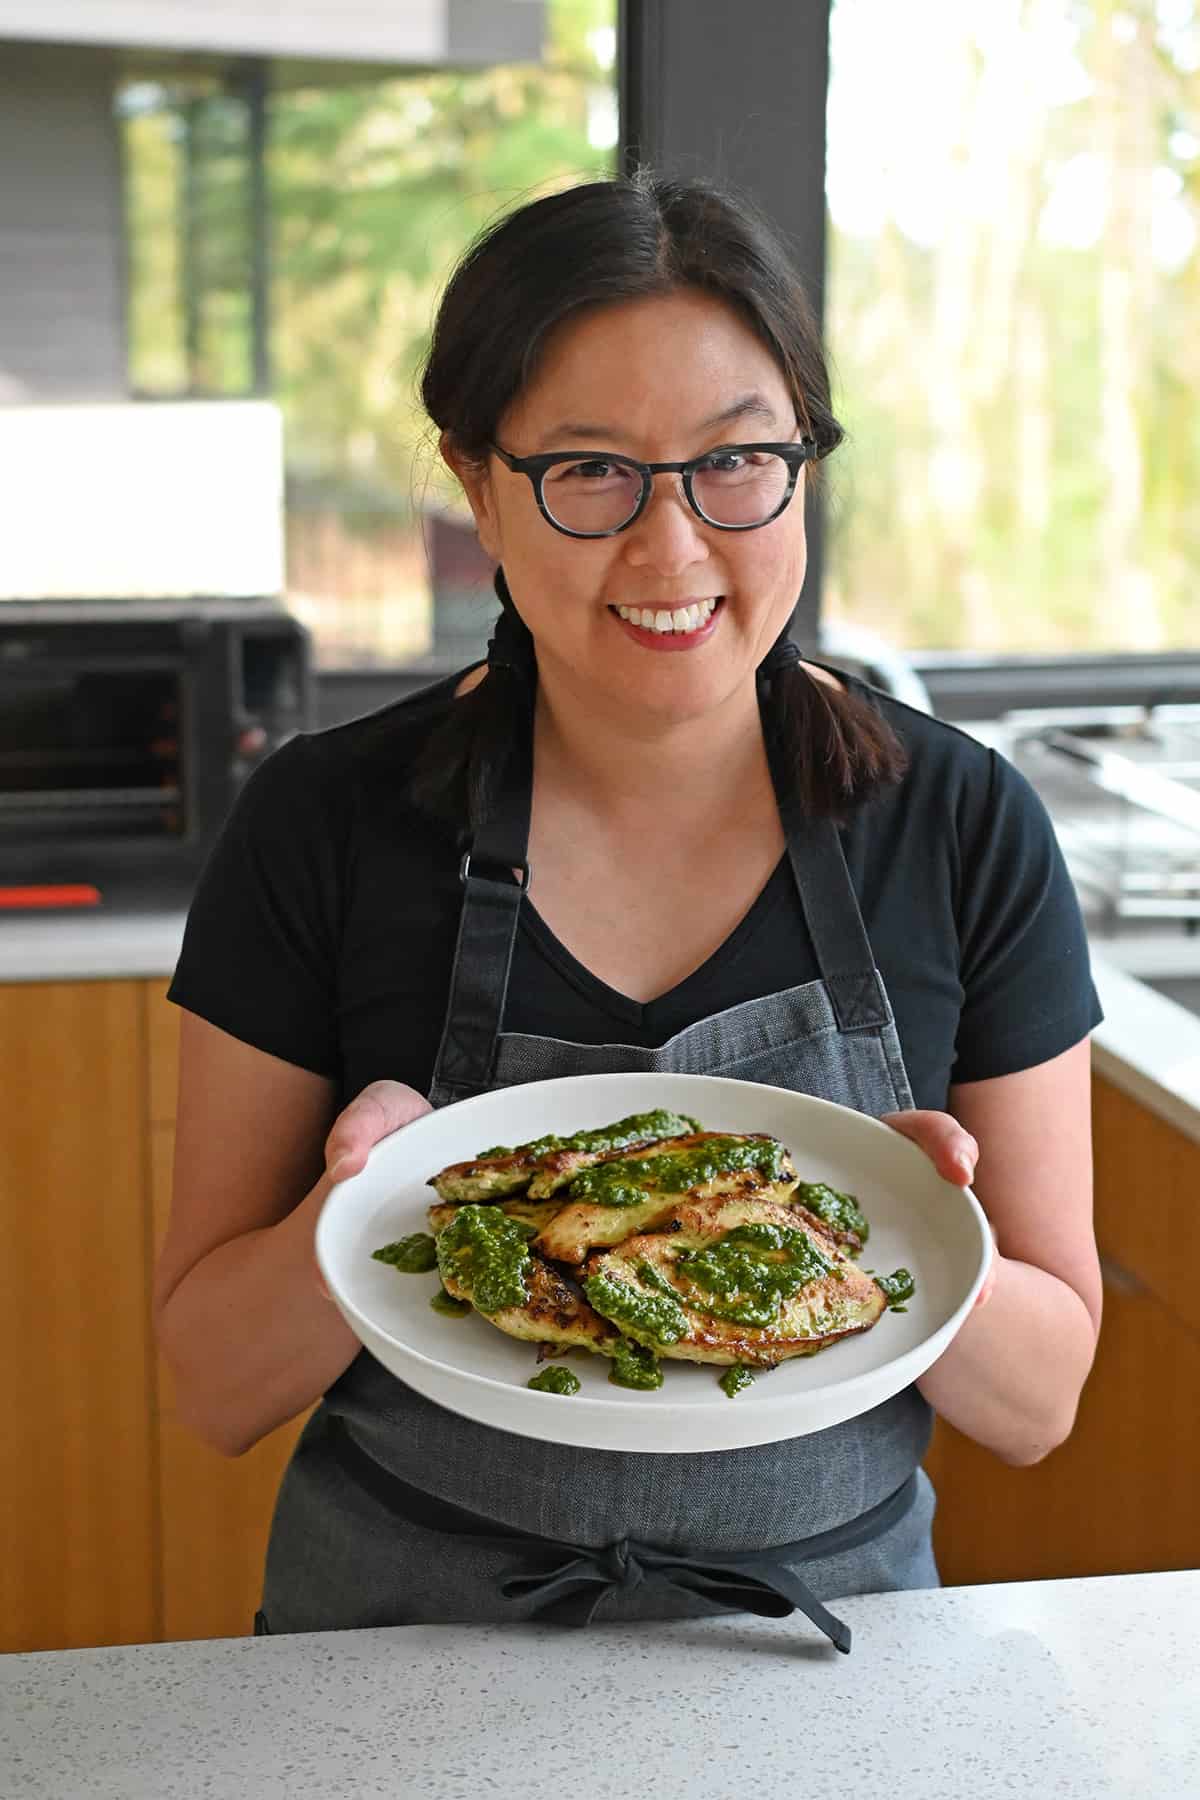 A smiling Asian woman wearing glasses is holding a plate filled with pesto chicken in a sunny kitchen.